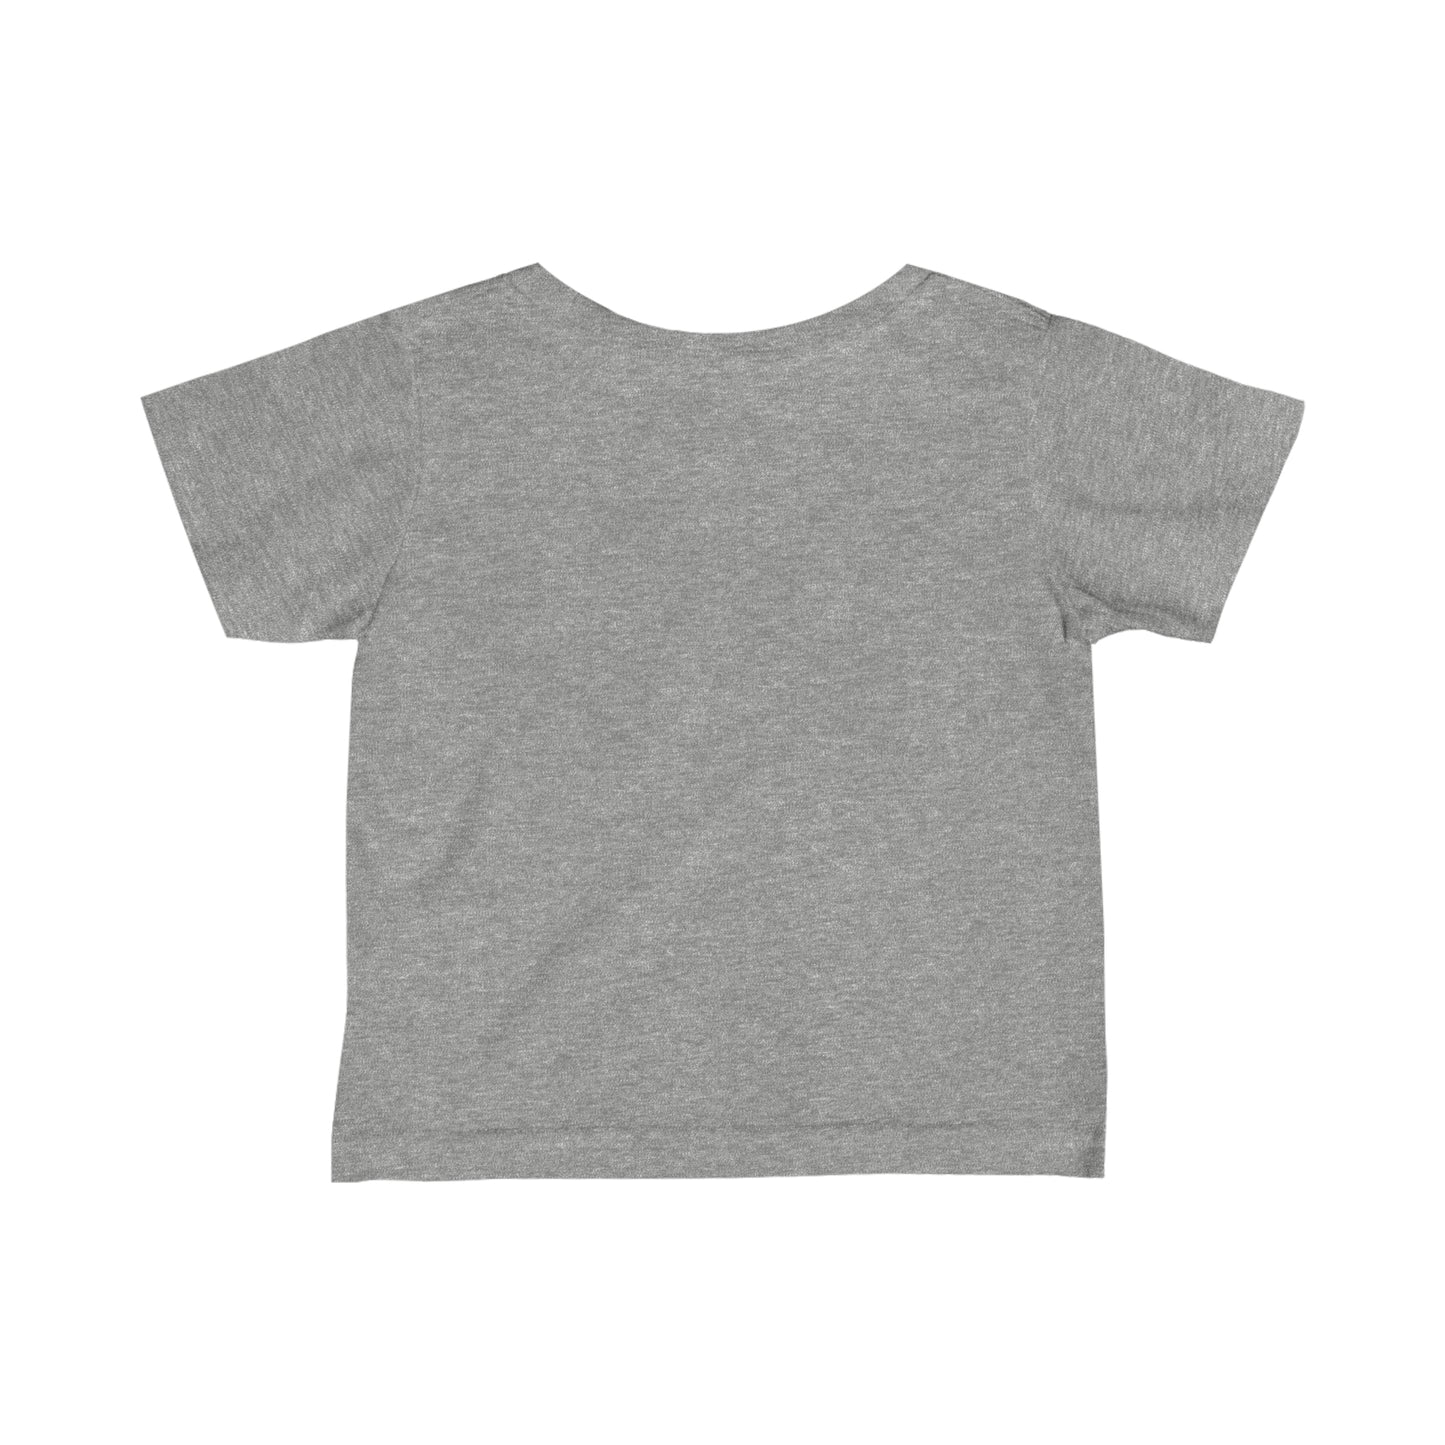 Infant Fine Jersey Tee, Canadian Maple Leaf